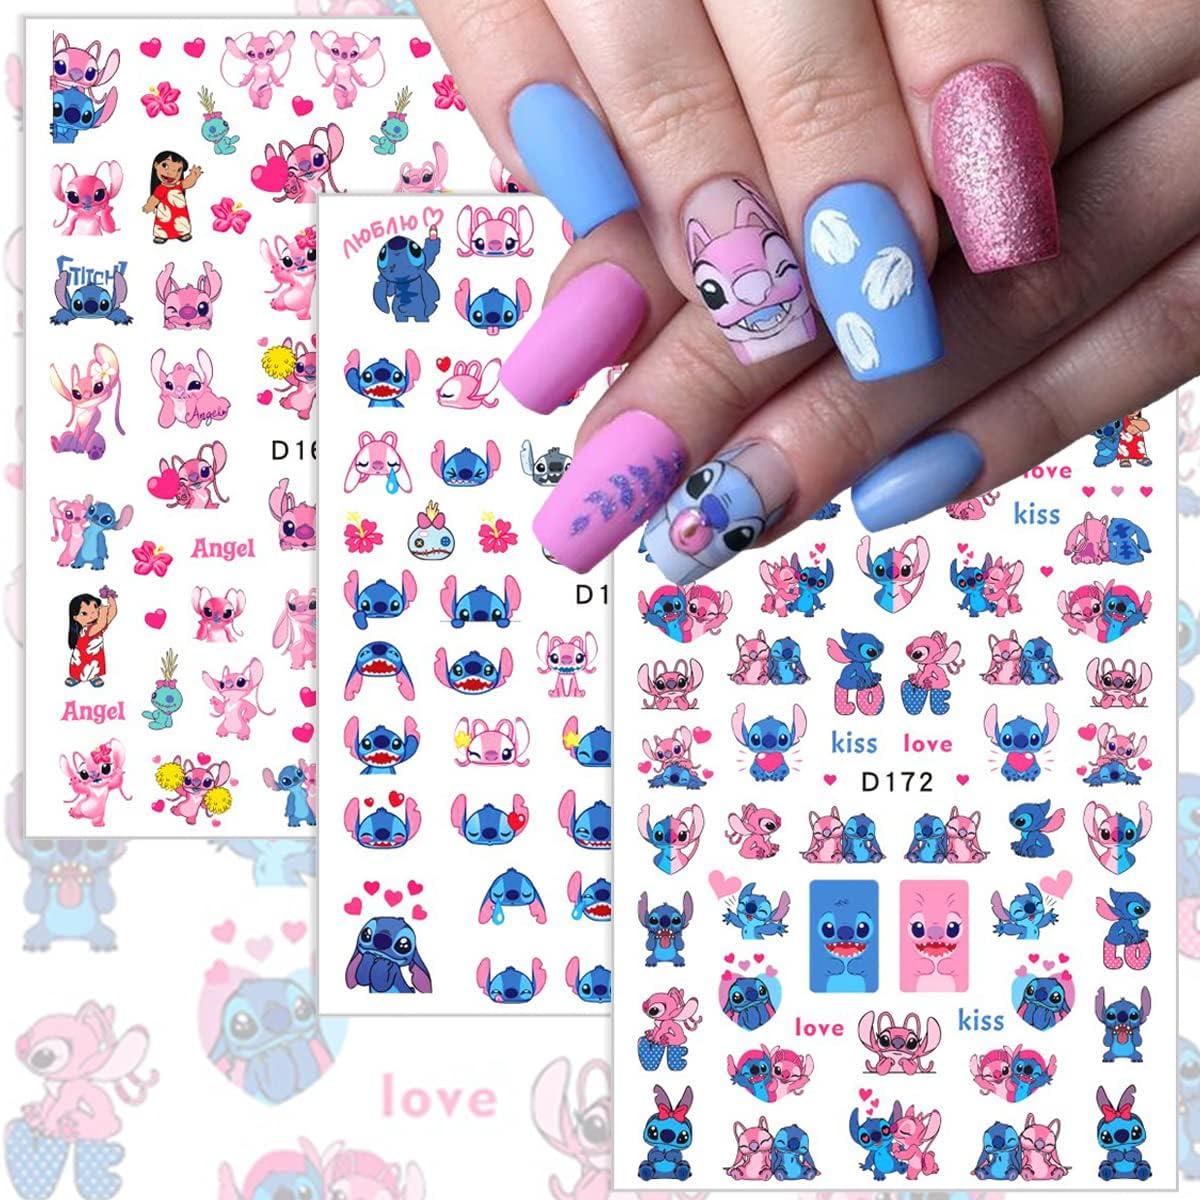 D172) New Nail Supplies Anime Lilo and Stitch 3D Nail Stickers Nail Art  Accessories Cartoon Mickey Nail Decals Nail Sliders on OnBuy